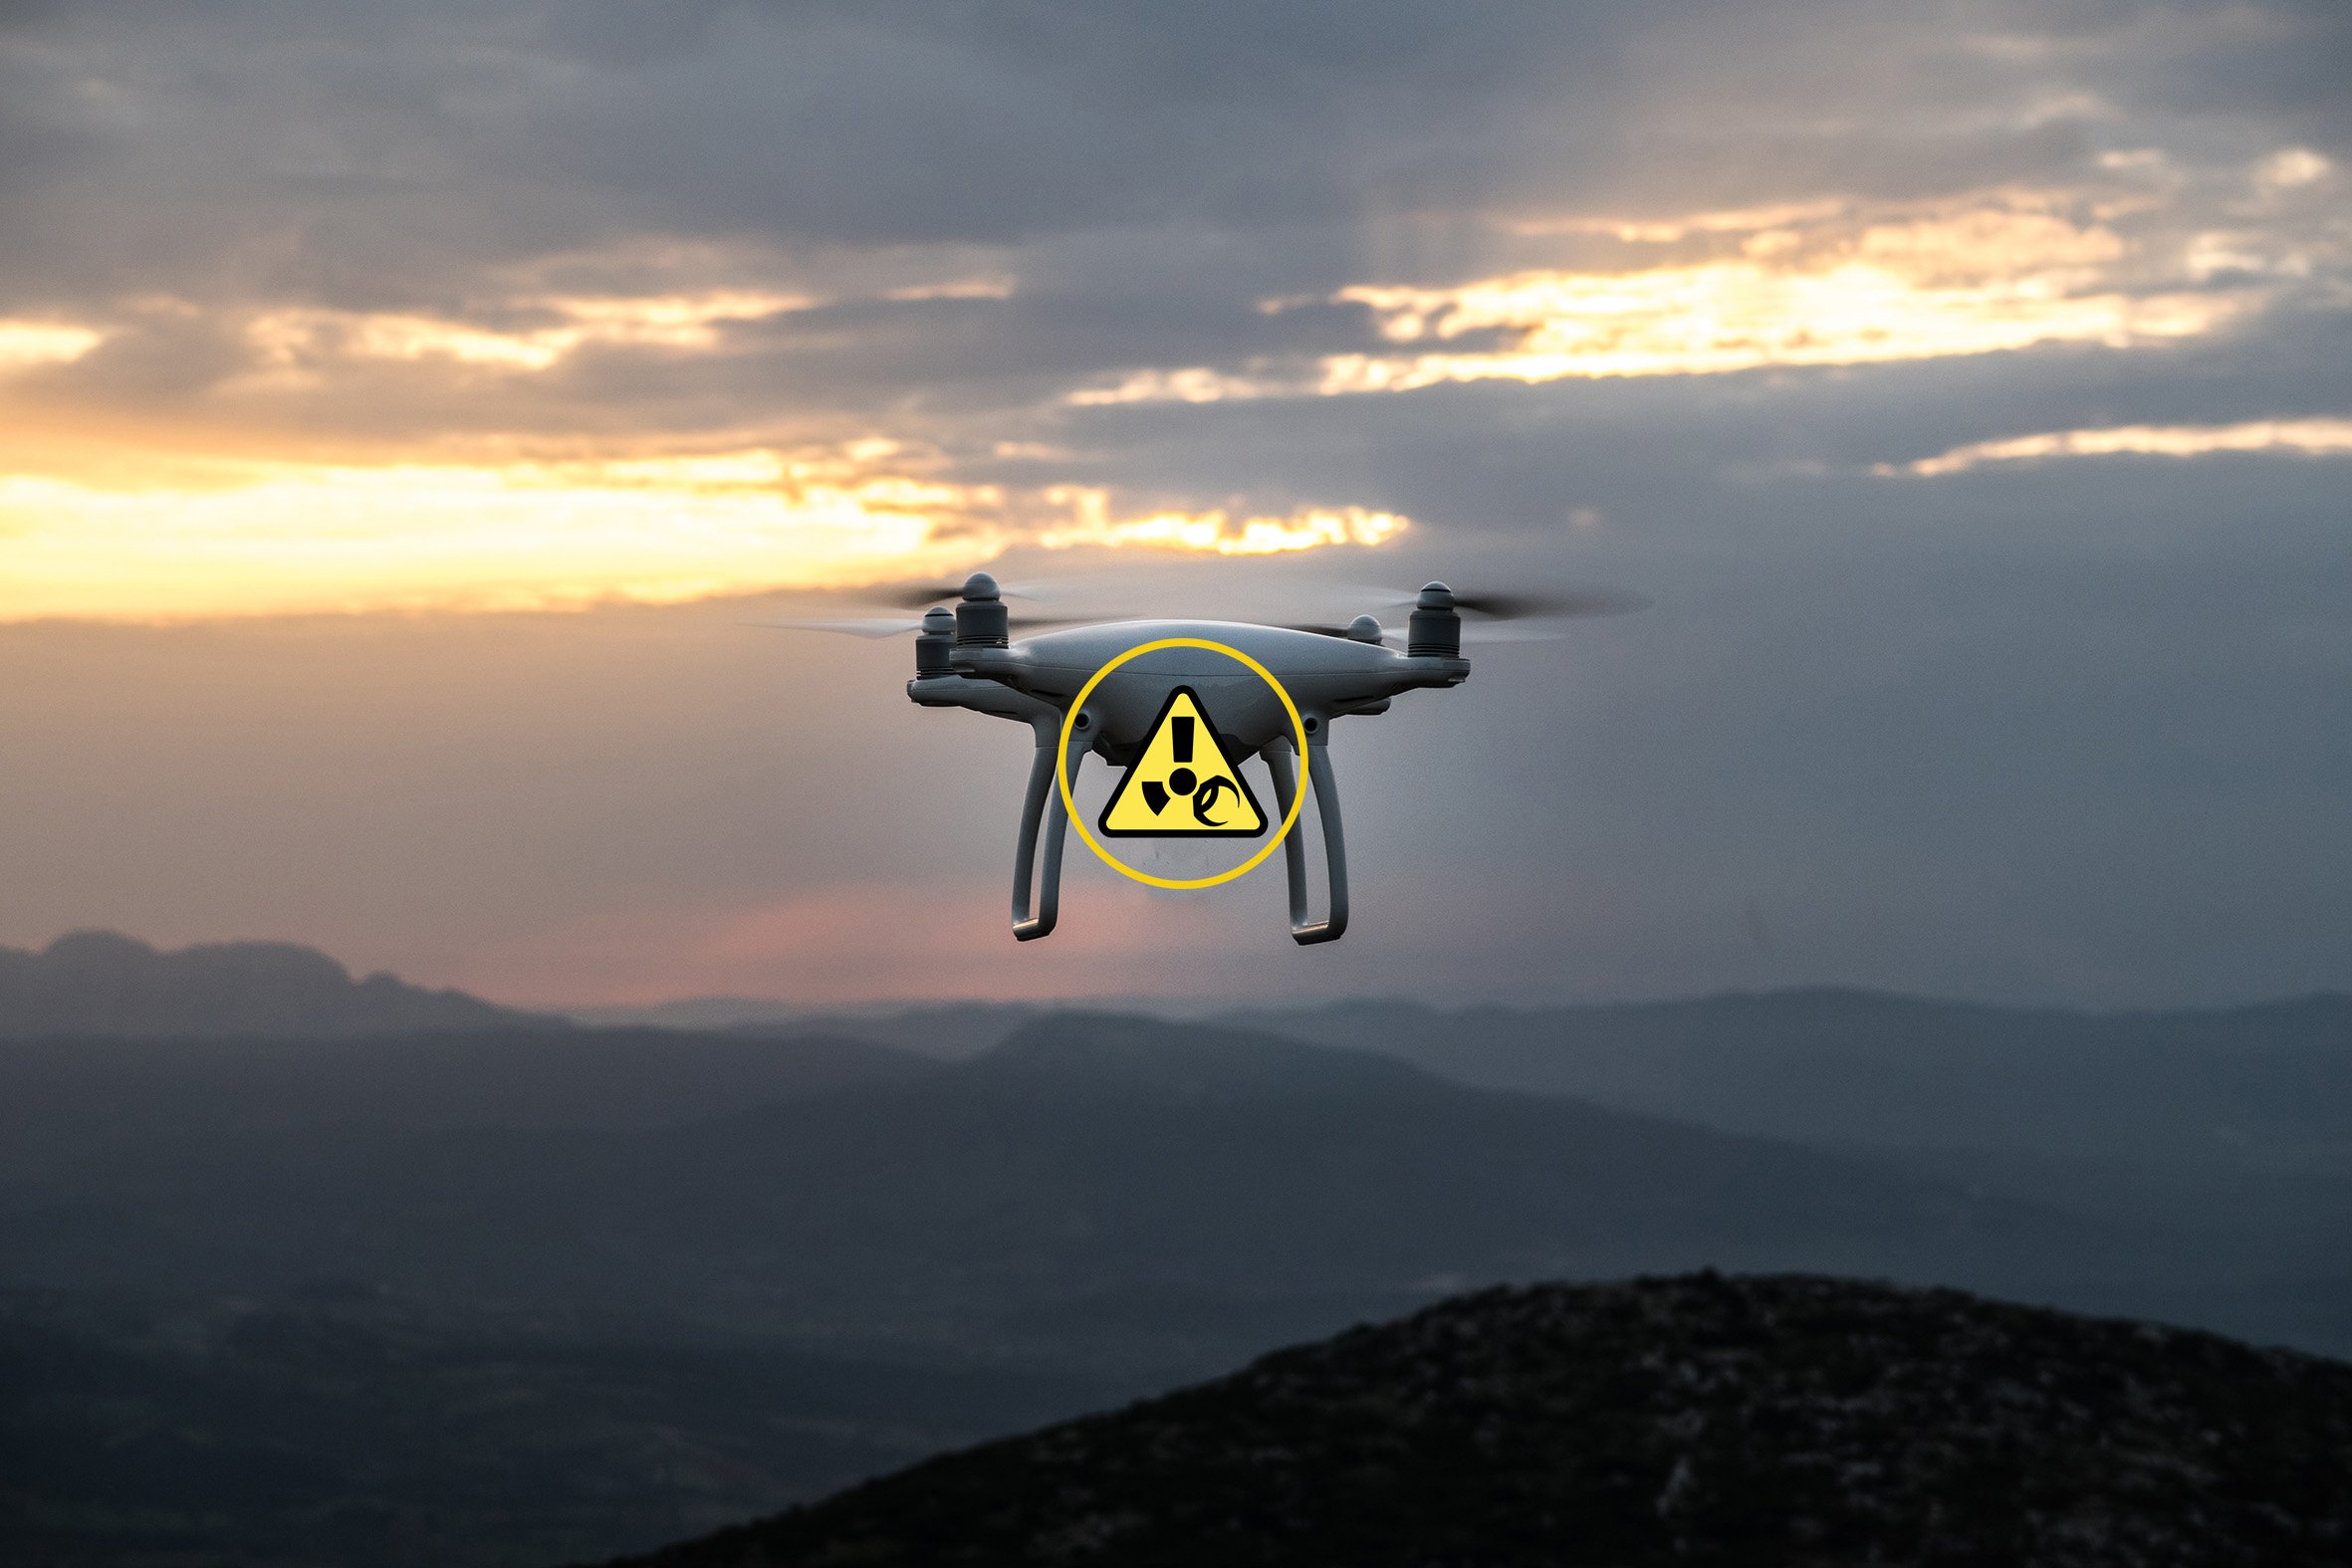 Drones can be a security risk.